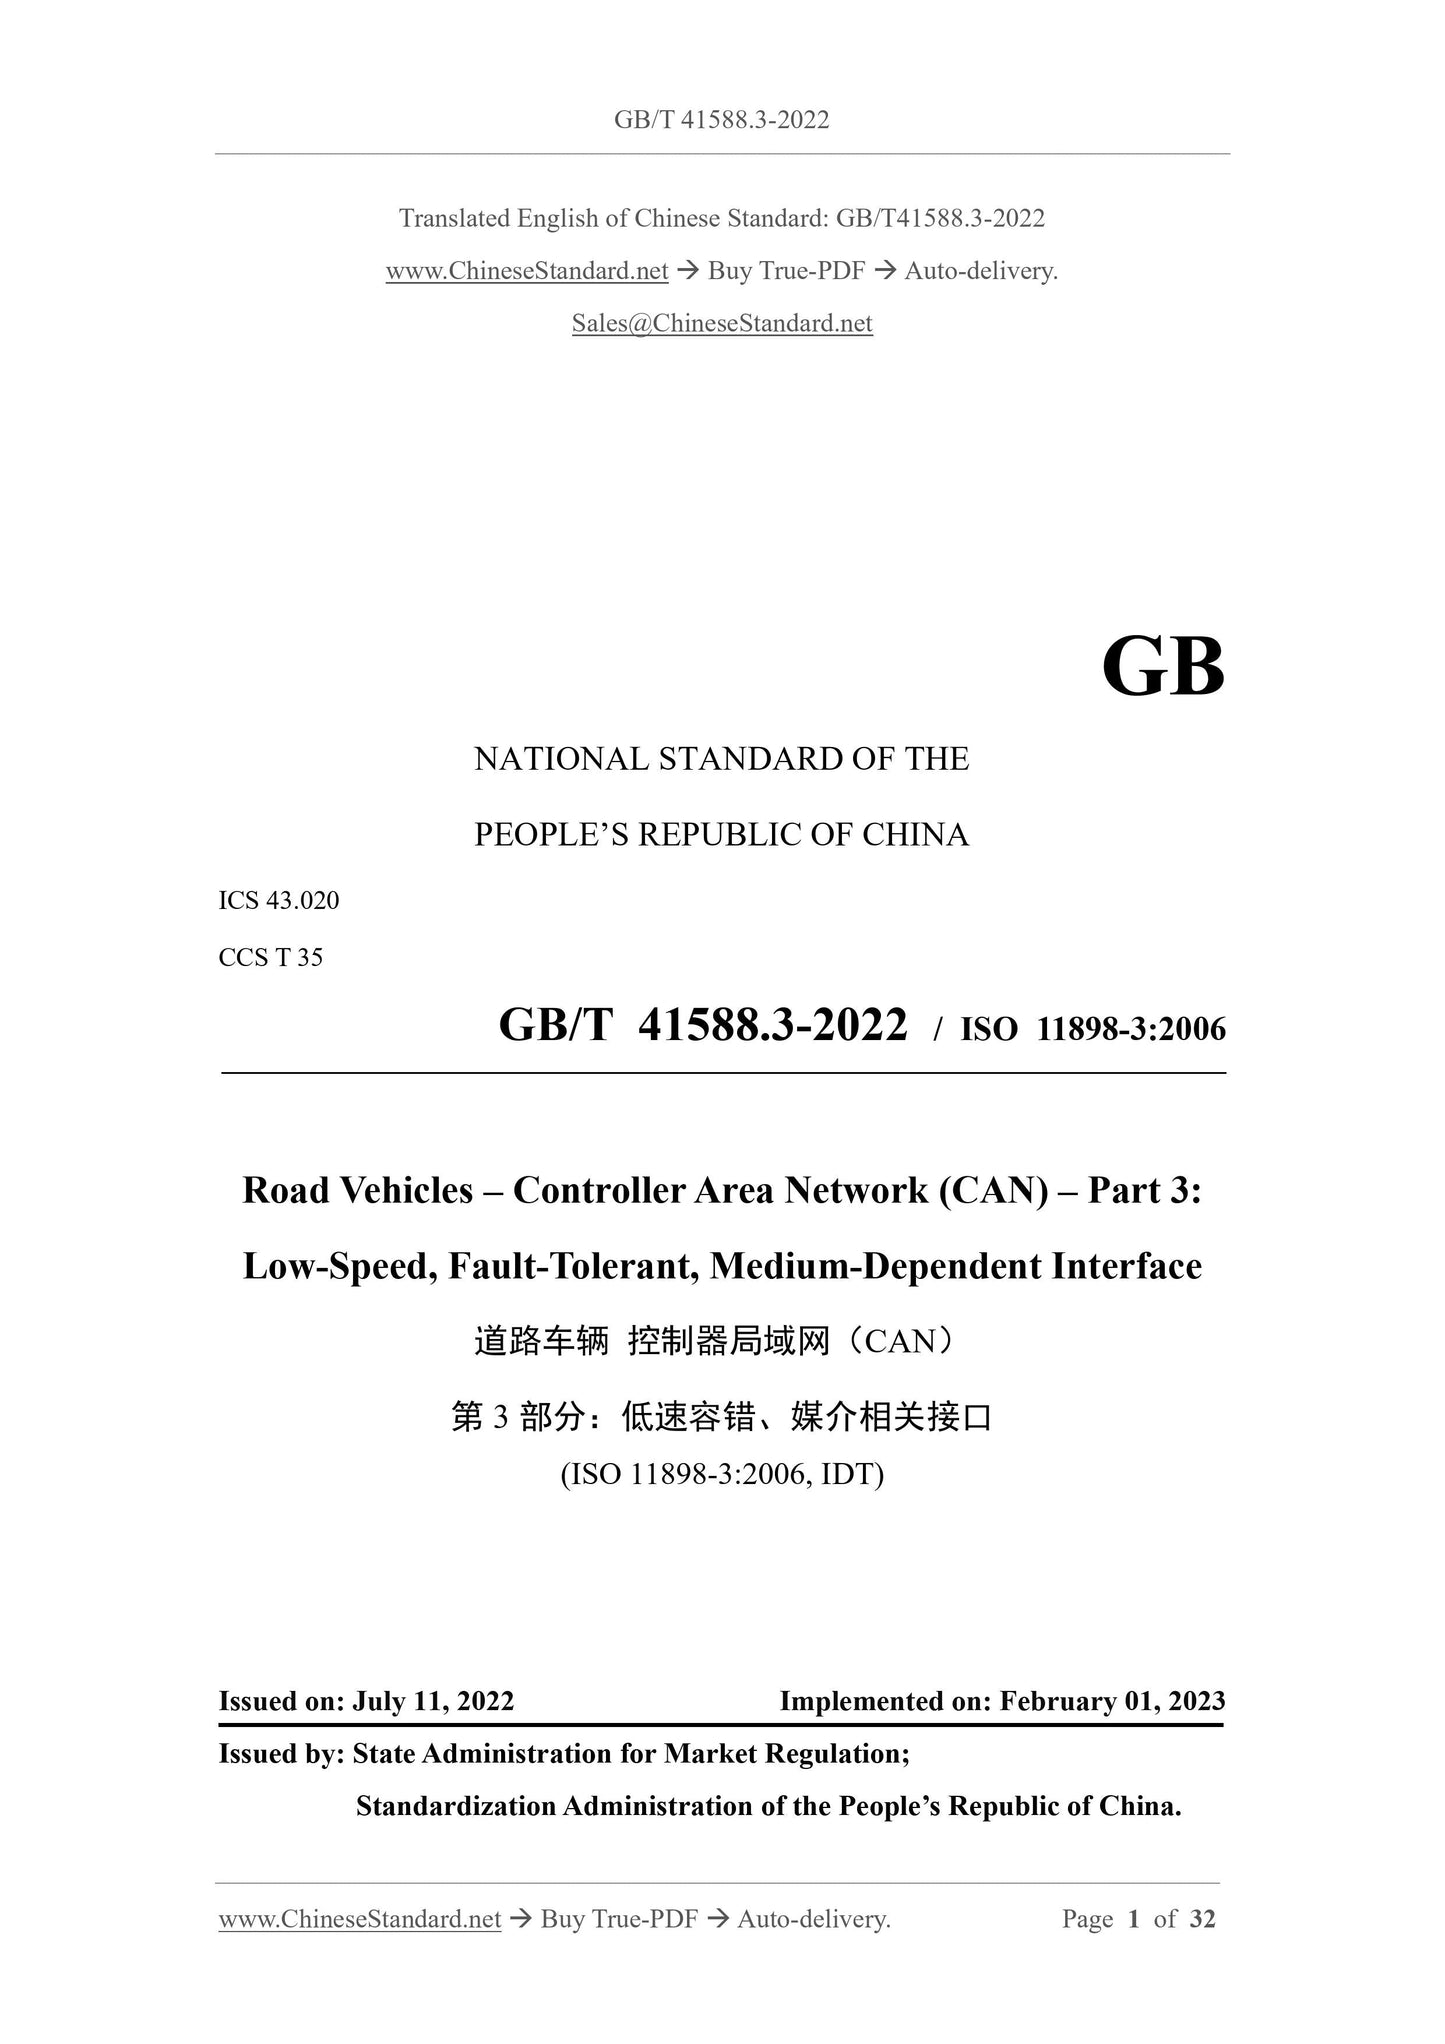 GB/T 41588.3-2022 Page 1